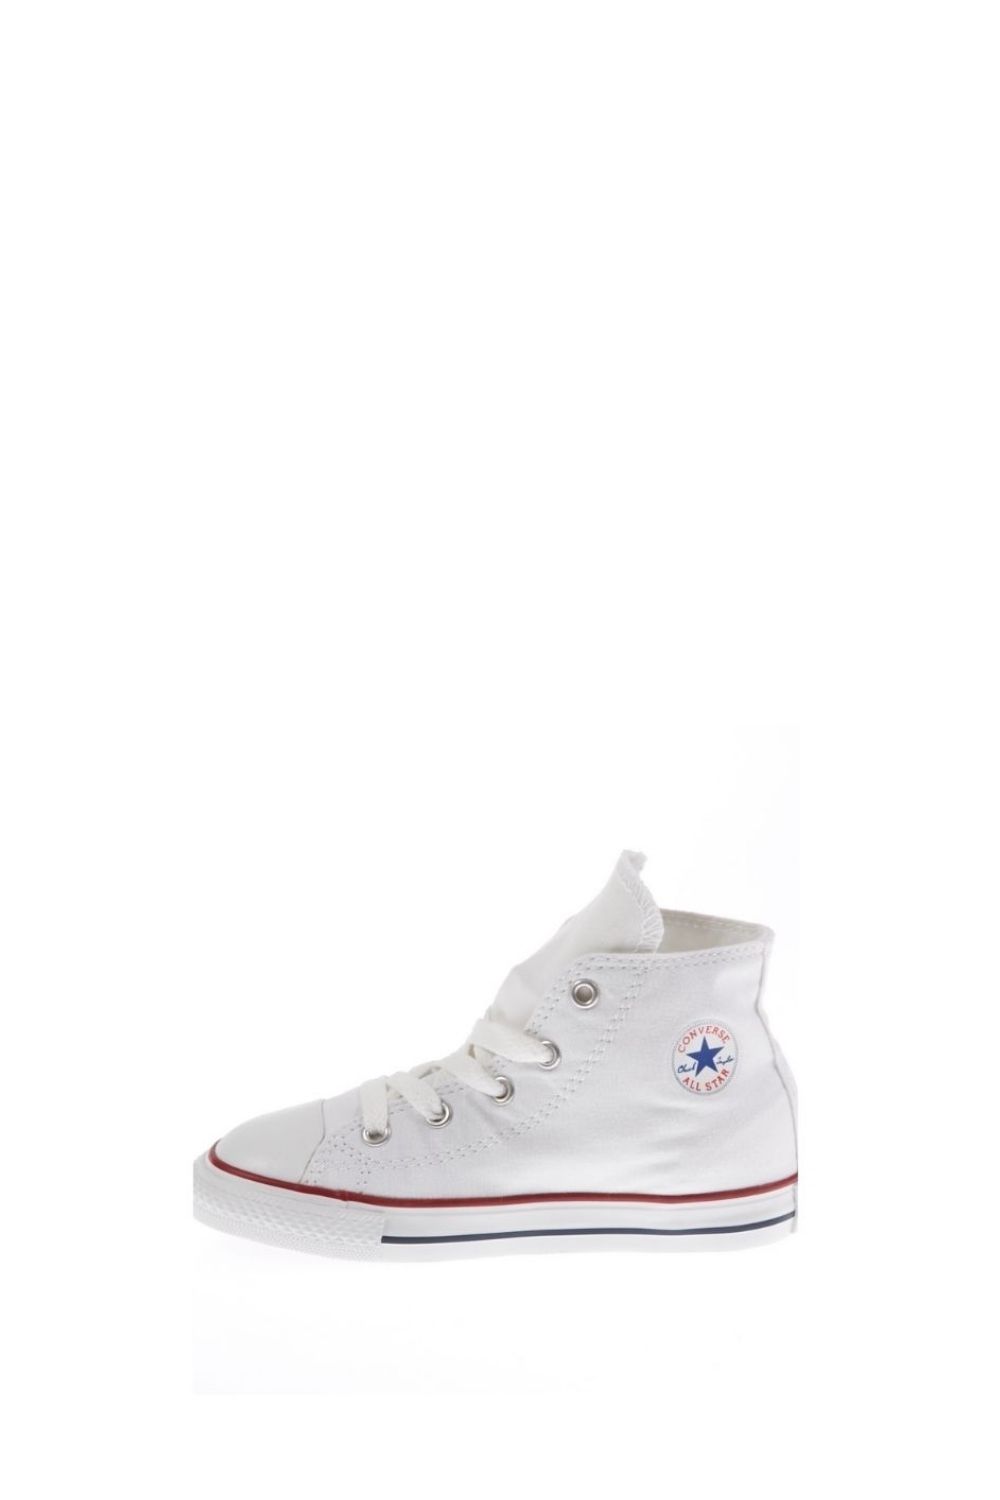 CONVERSE - Βρεφικά μποτάκια Chuck Taylor λευκά Παιδικά/Baby/Παπούτσια/Sneakers